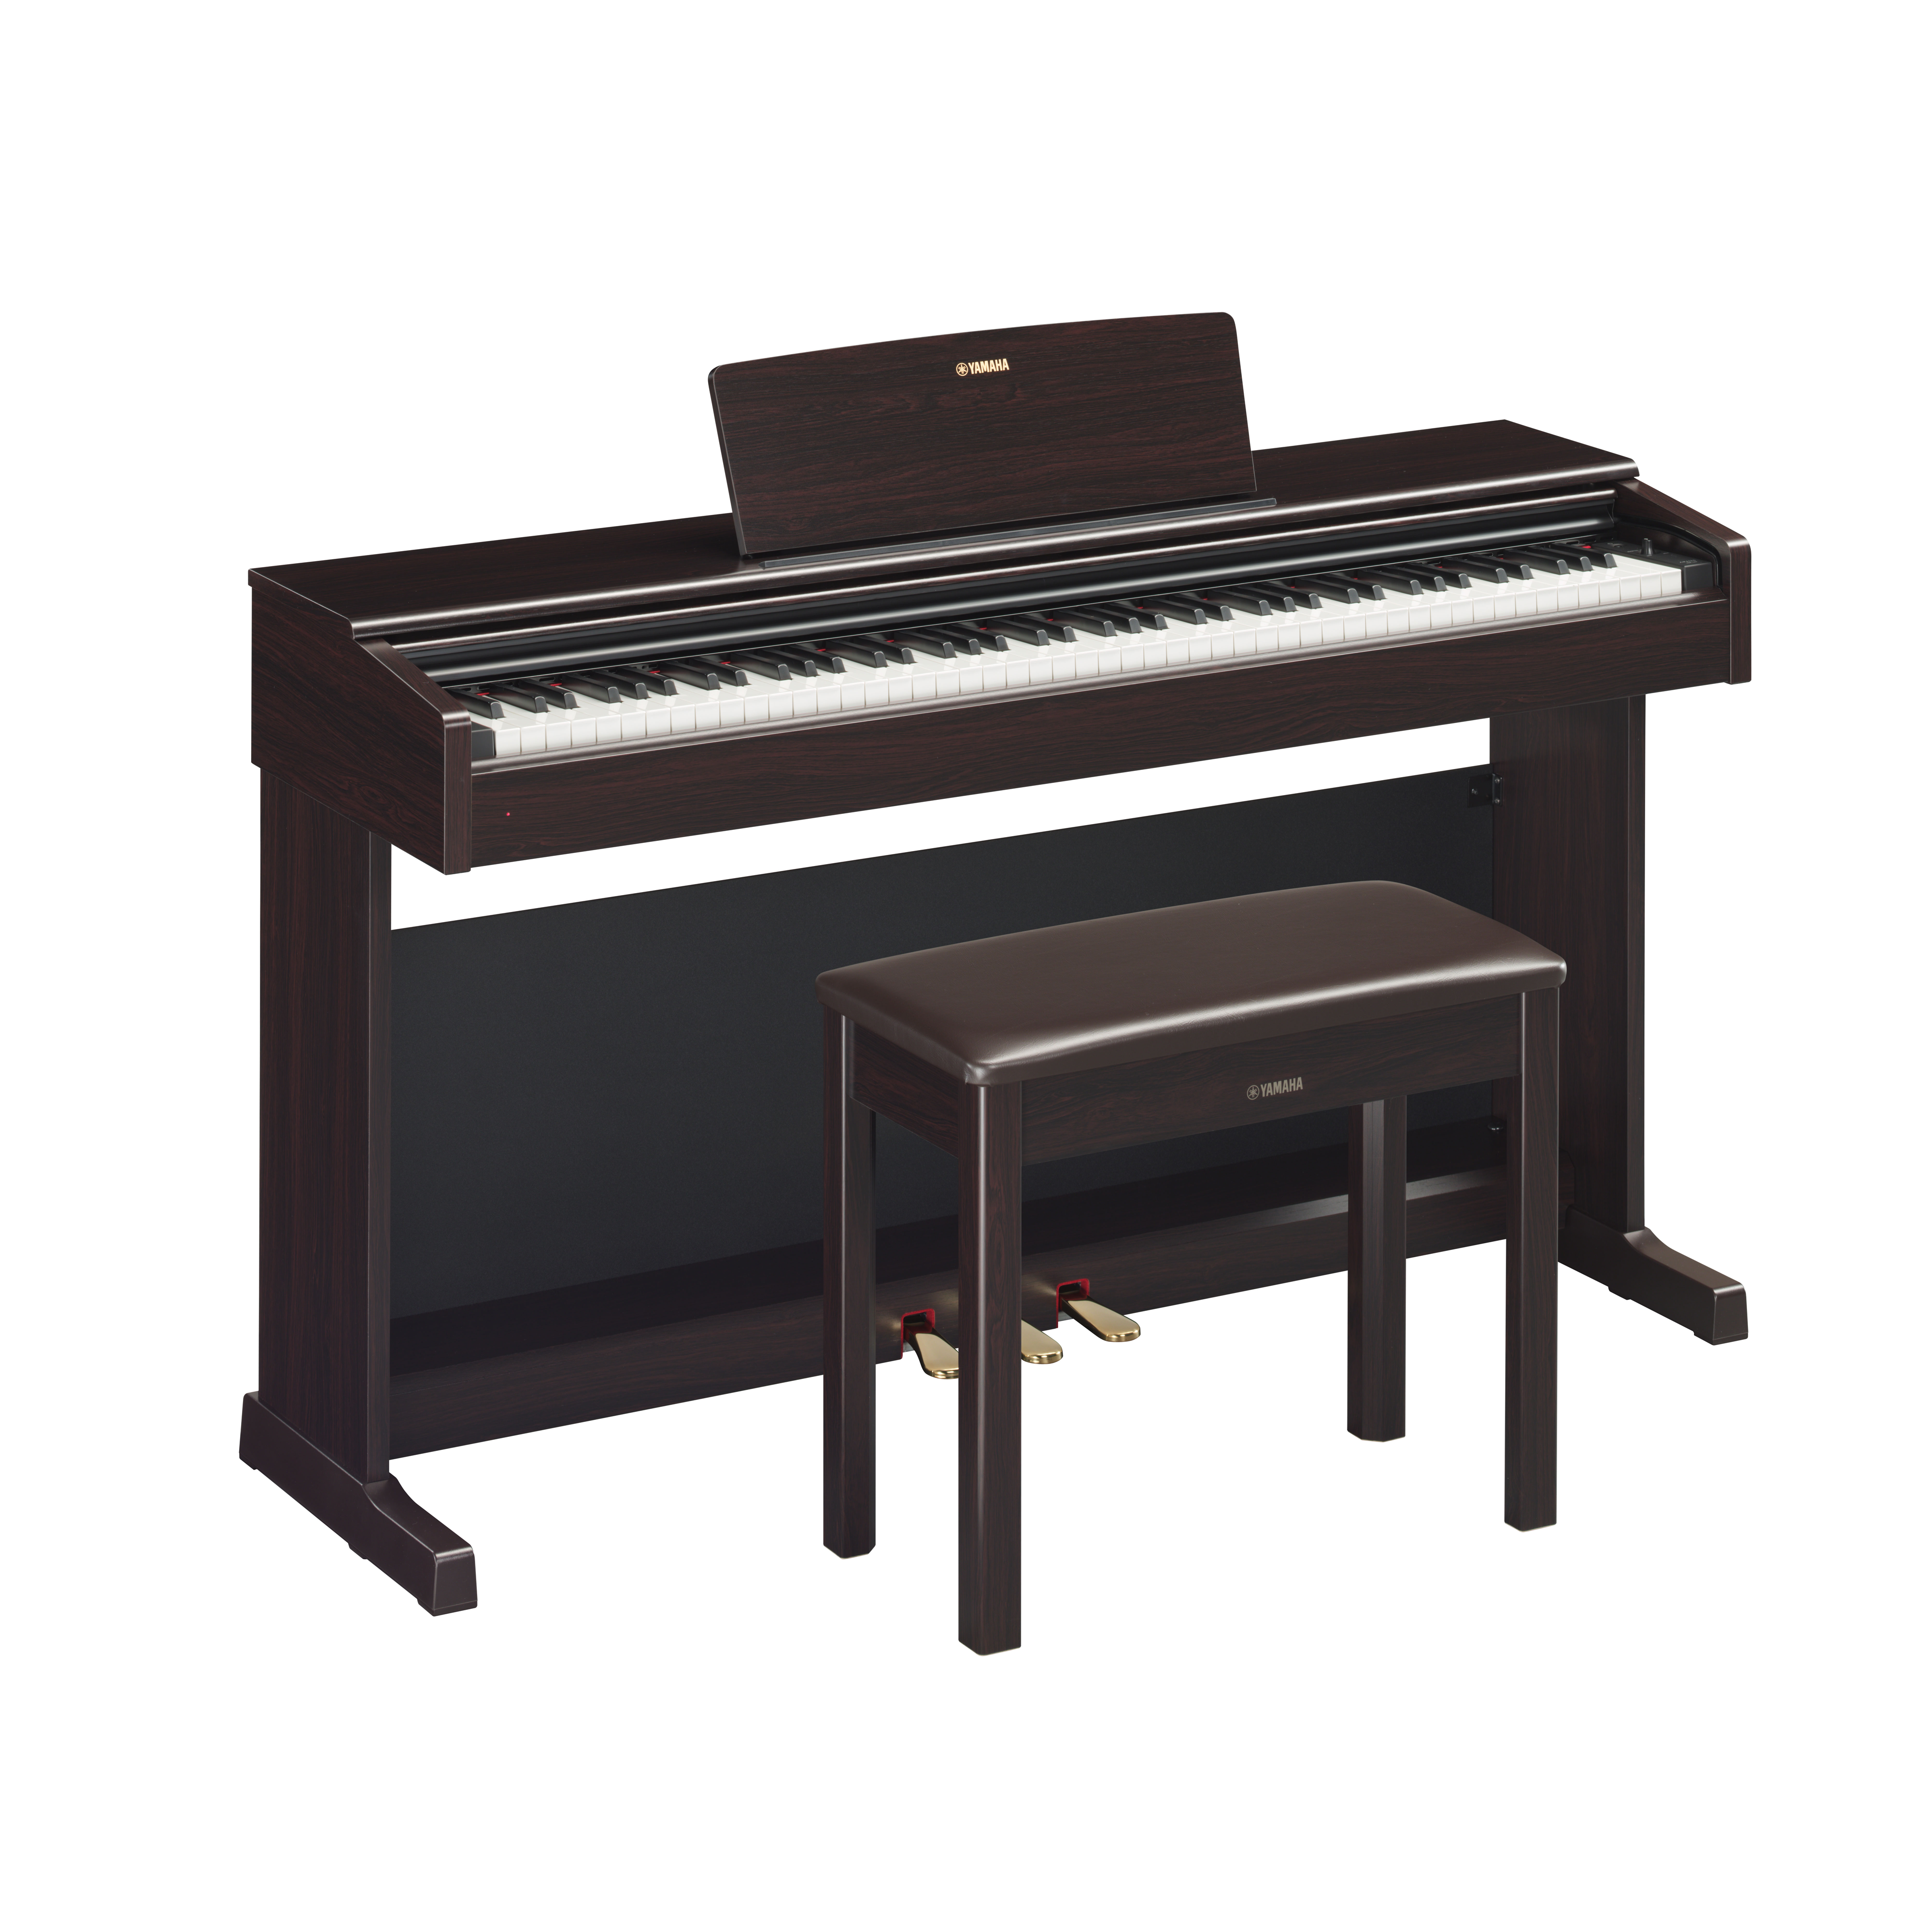 YDP-144 - Specs - ARIUS - Pianos - Musical Instruments - Products 